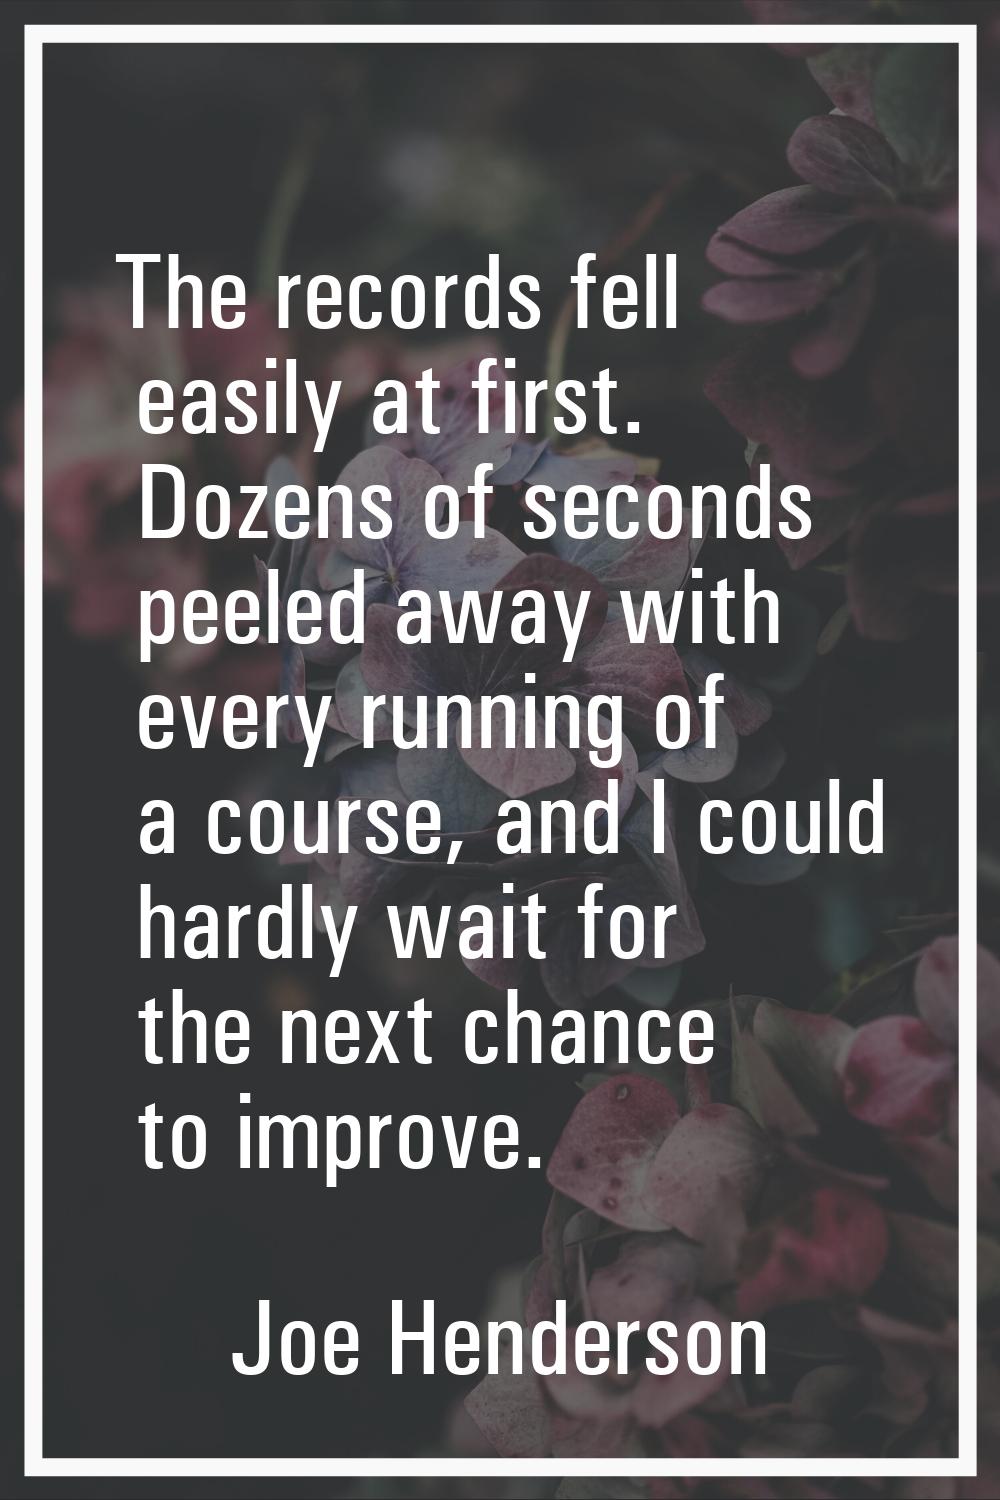 The records fell easily at first. Dozens of seconds peeled away with every running of a course, and